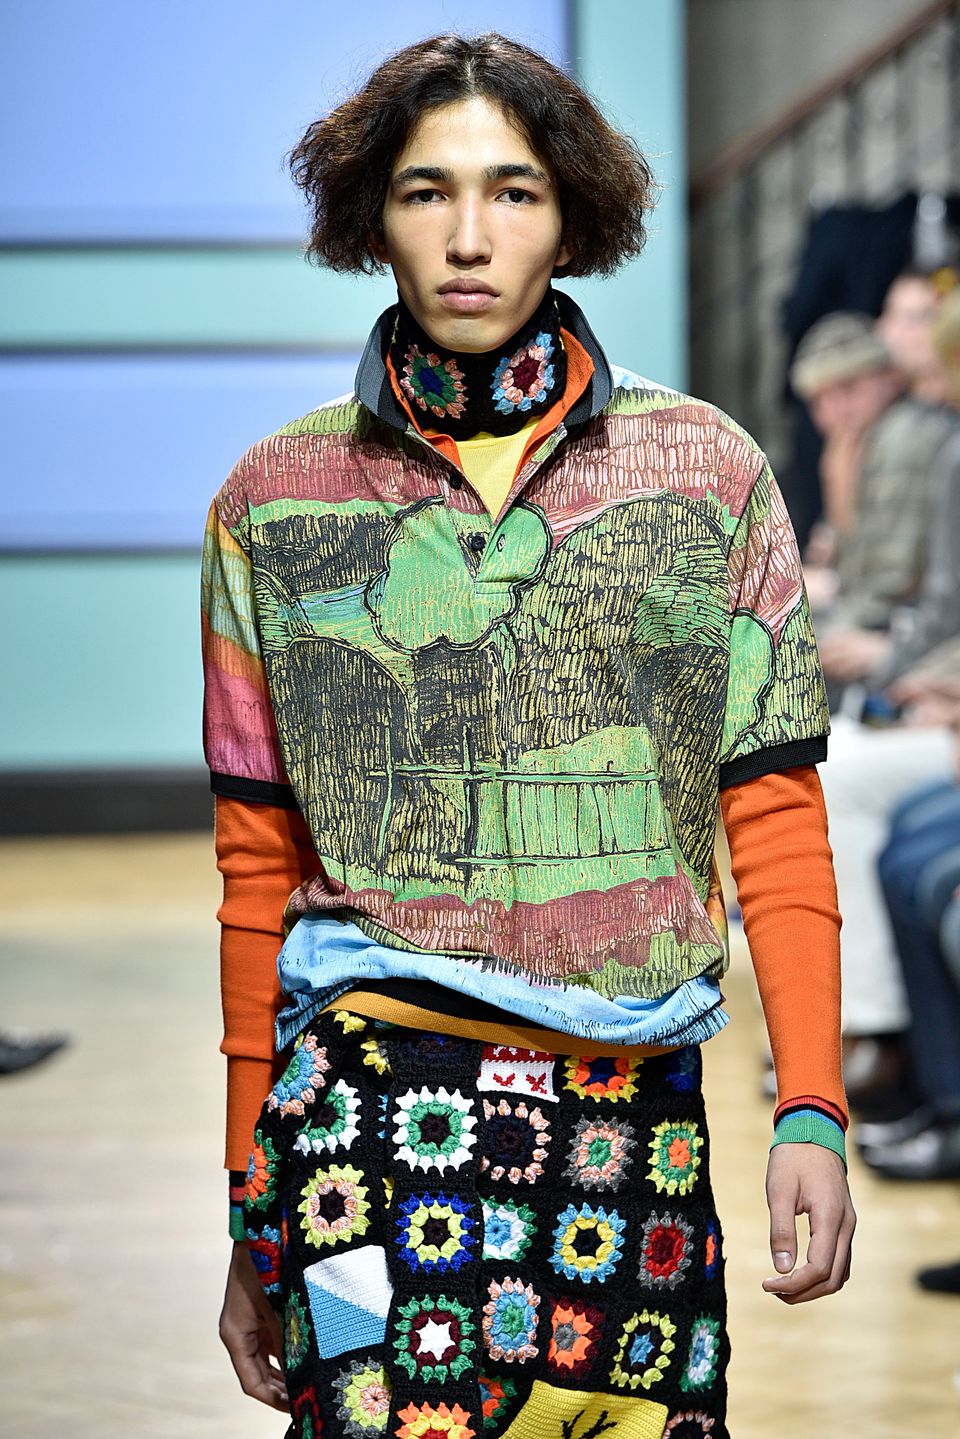 The 22 Most Outrageous Looks From London Men's Fashion Week | HuffPost Life